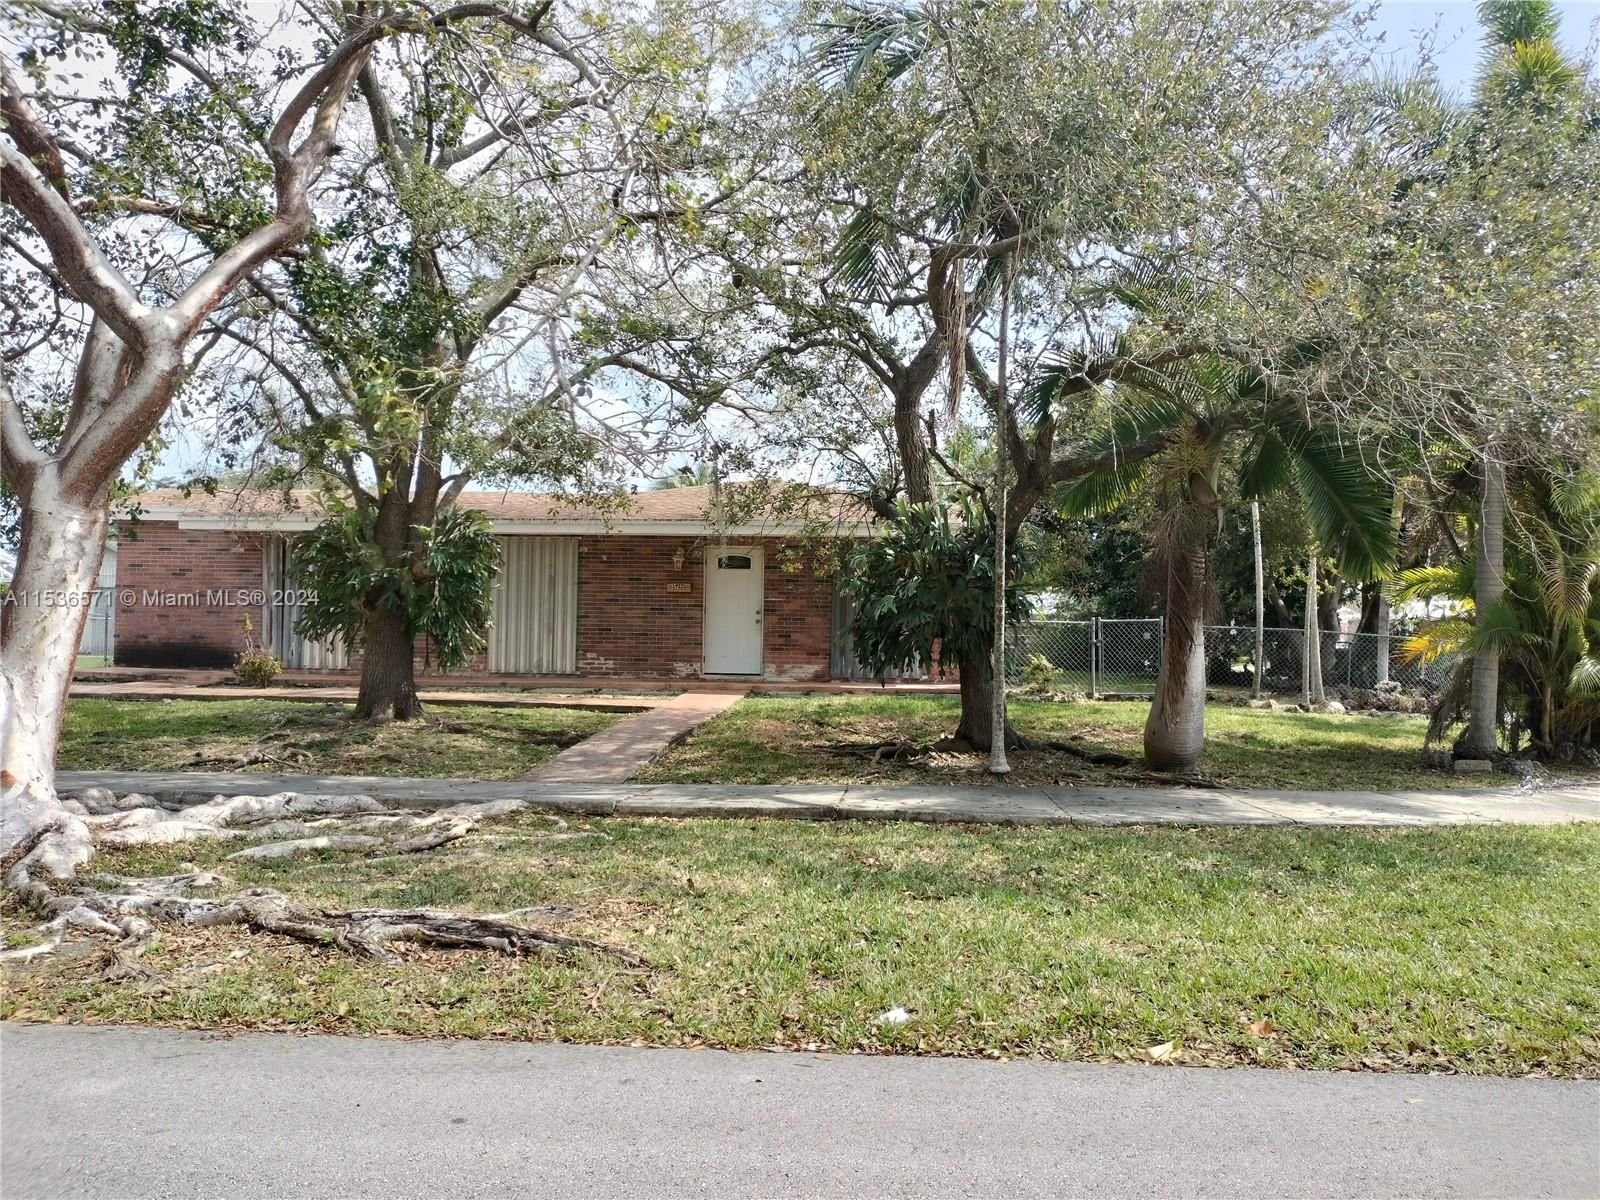 Real estate property located at 19225 Bel Aire Dr, Miami-Dade County, BEL AIRE SEC 3, Cutler Bay, FL